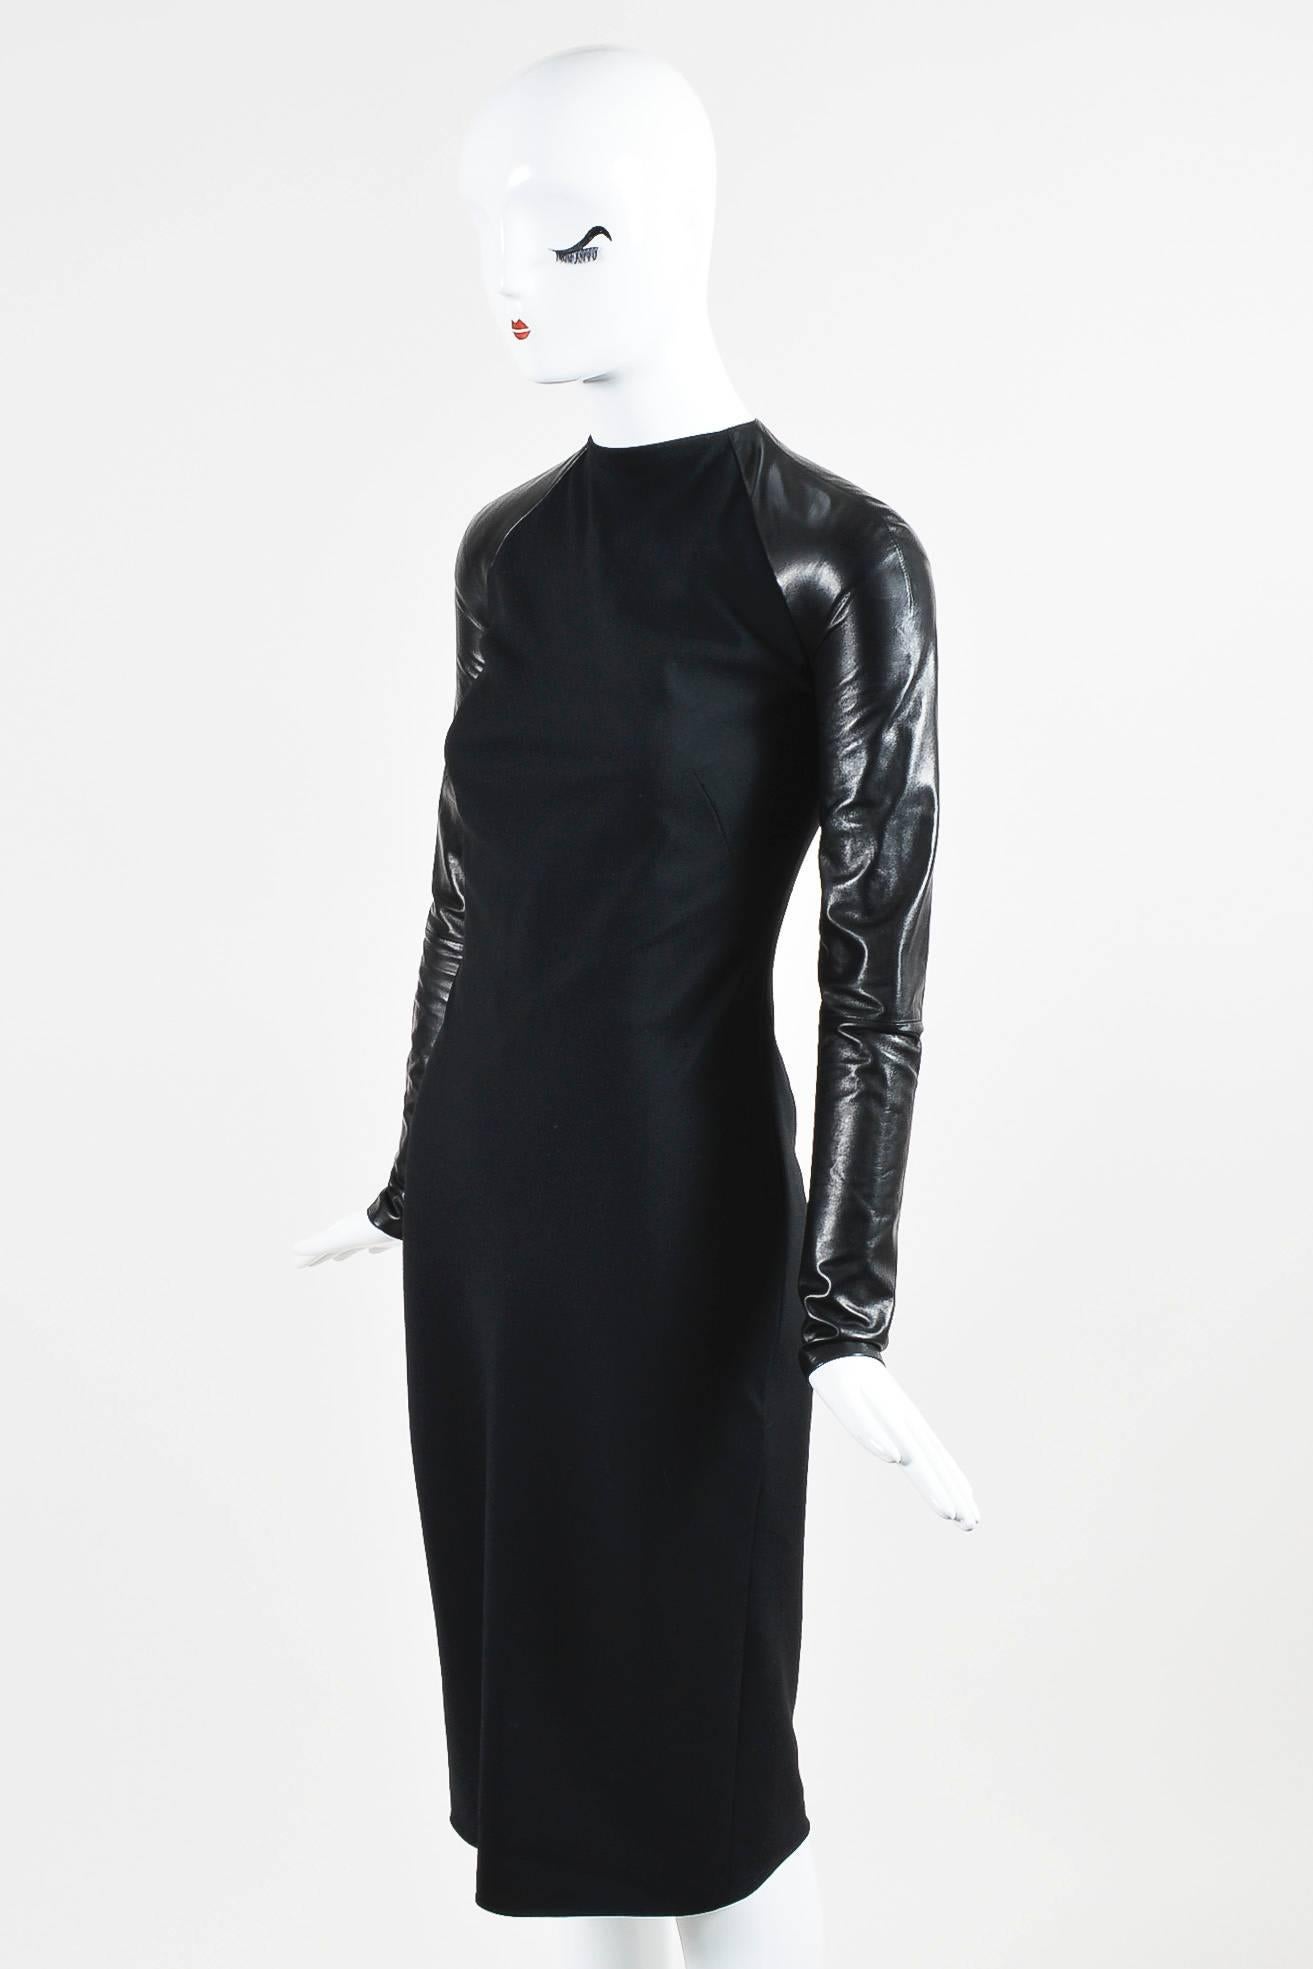 Retails at $5295. This sleek dress off the fall 2012 runway can effortlessly transition from day to evening. Woven wool textile. Leather long sleeves with zip closure. High neckline. Interior mesh panel with corset boning inside body. Open back with